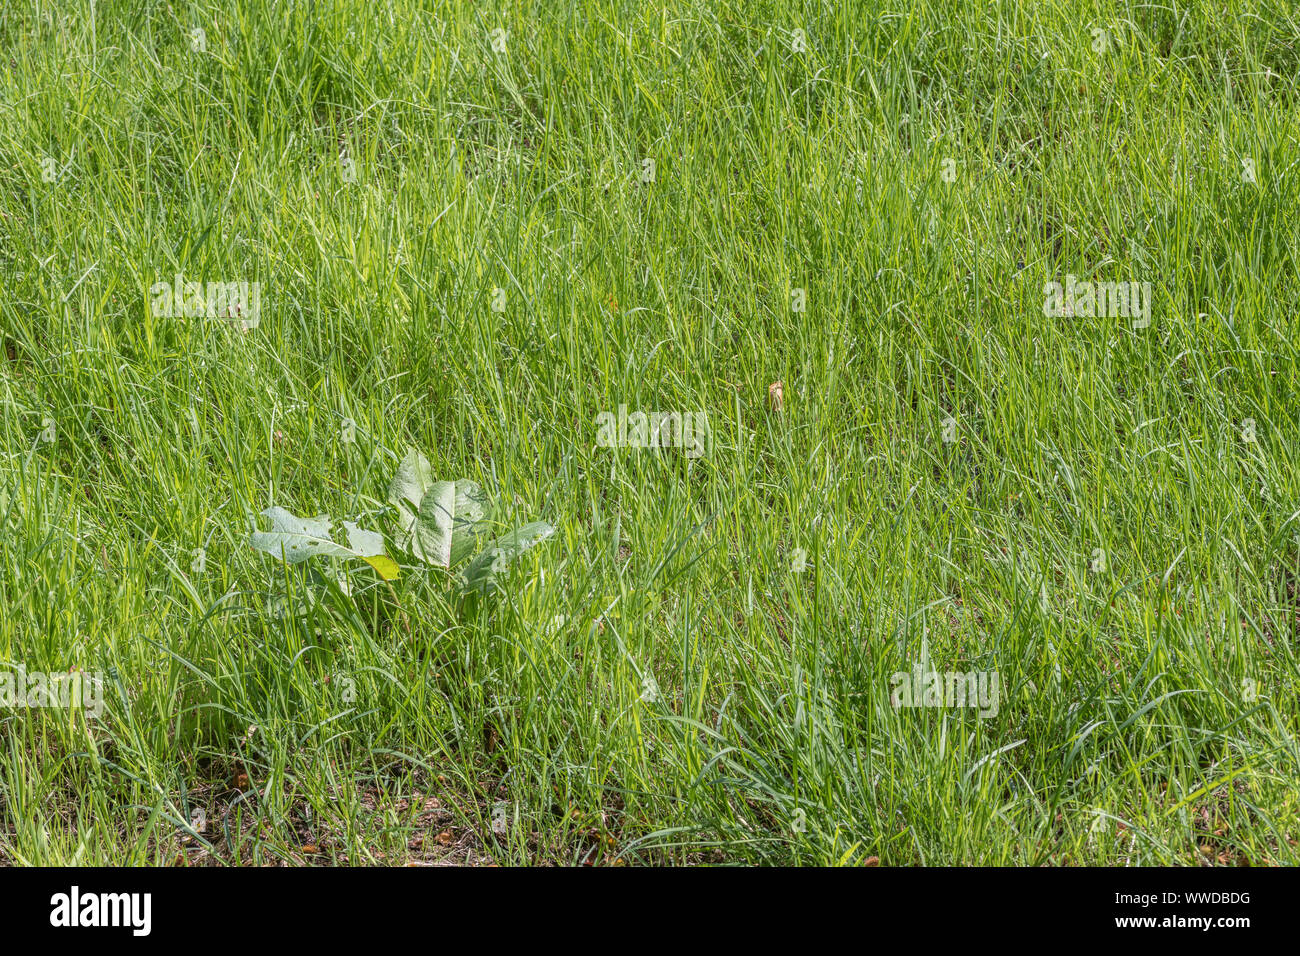 Solitary specimen of Broad-Leaved Dock / Rumex obtusifolius isolated in a mass of field grass. Metaphor isolated, solitary, common weeds, grass patch. Stock Photo